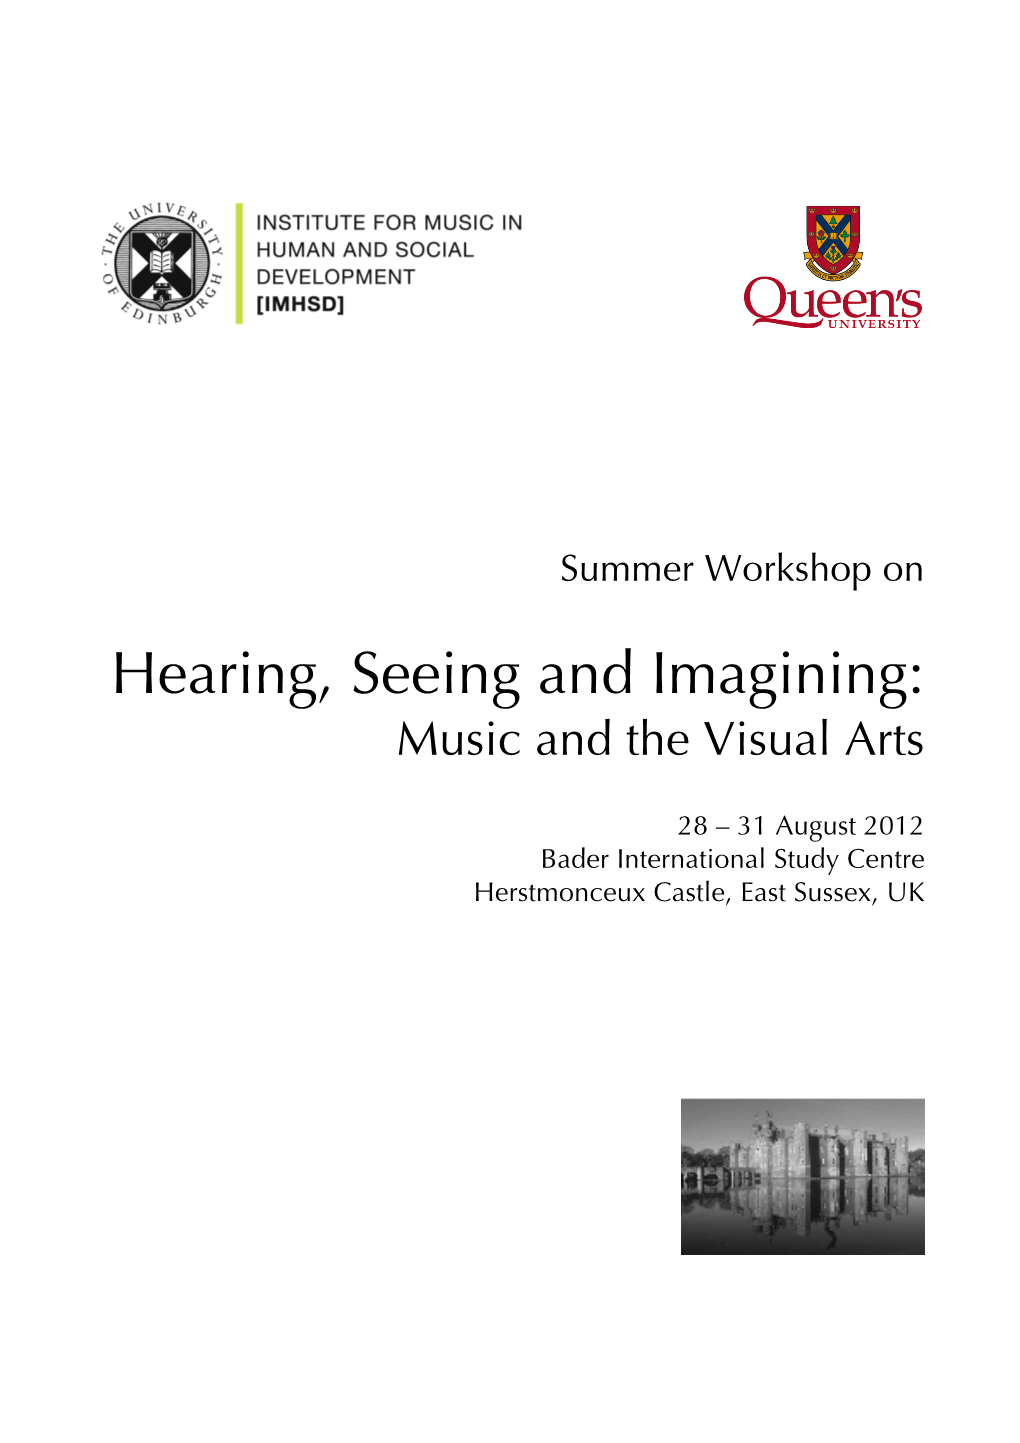 Hearing, Seeing and Imagining: Music and the Visual Arts